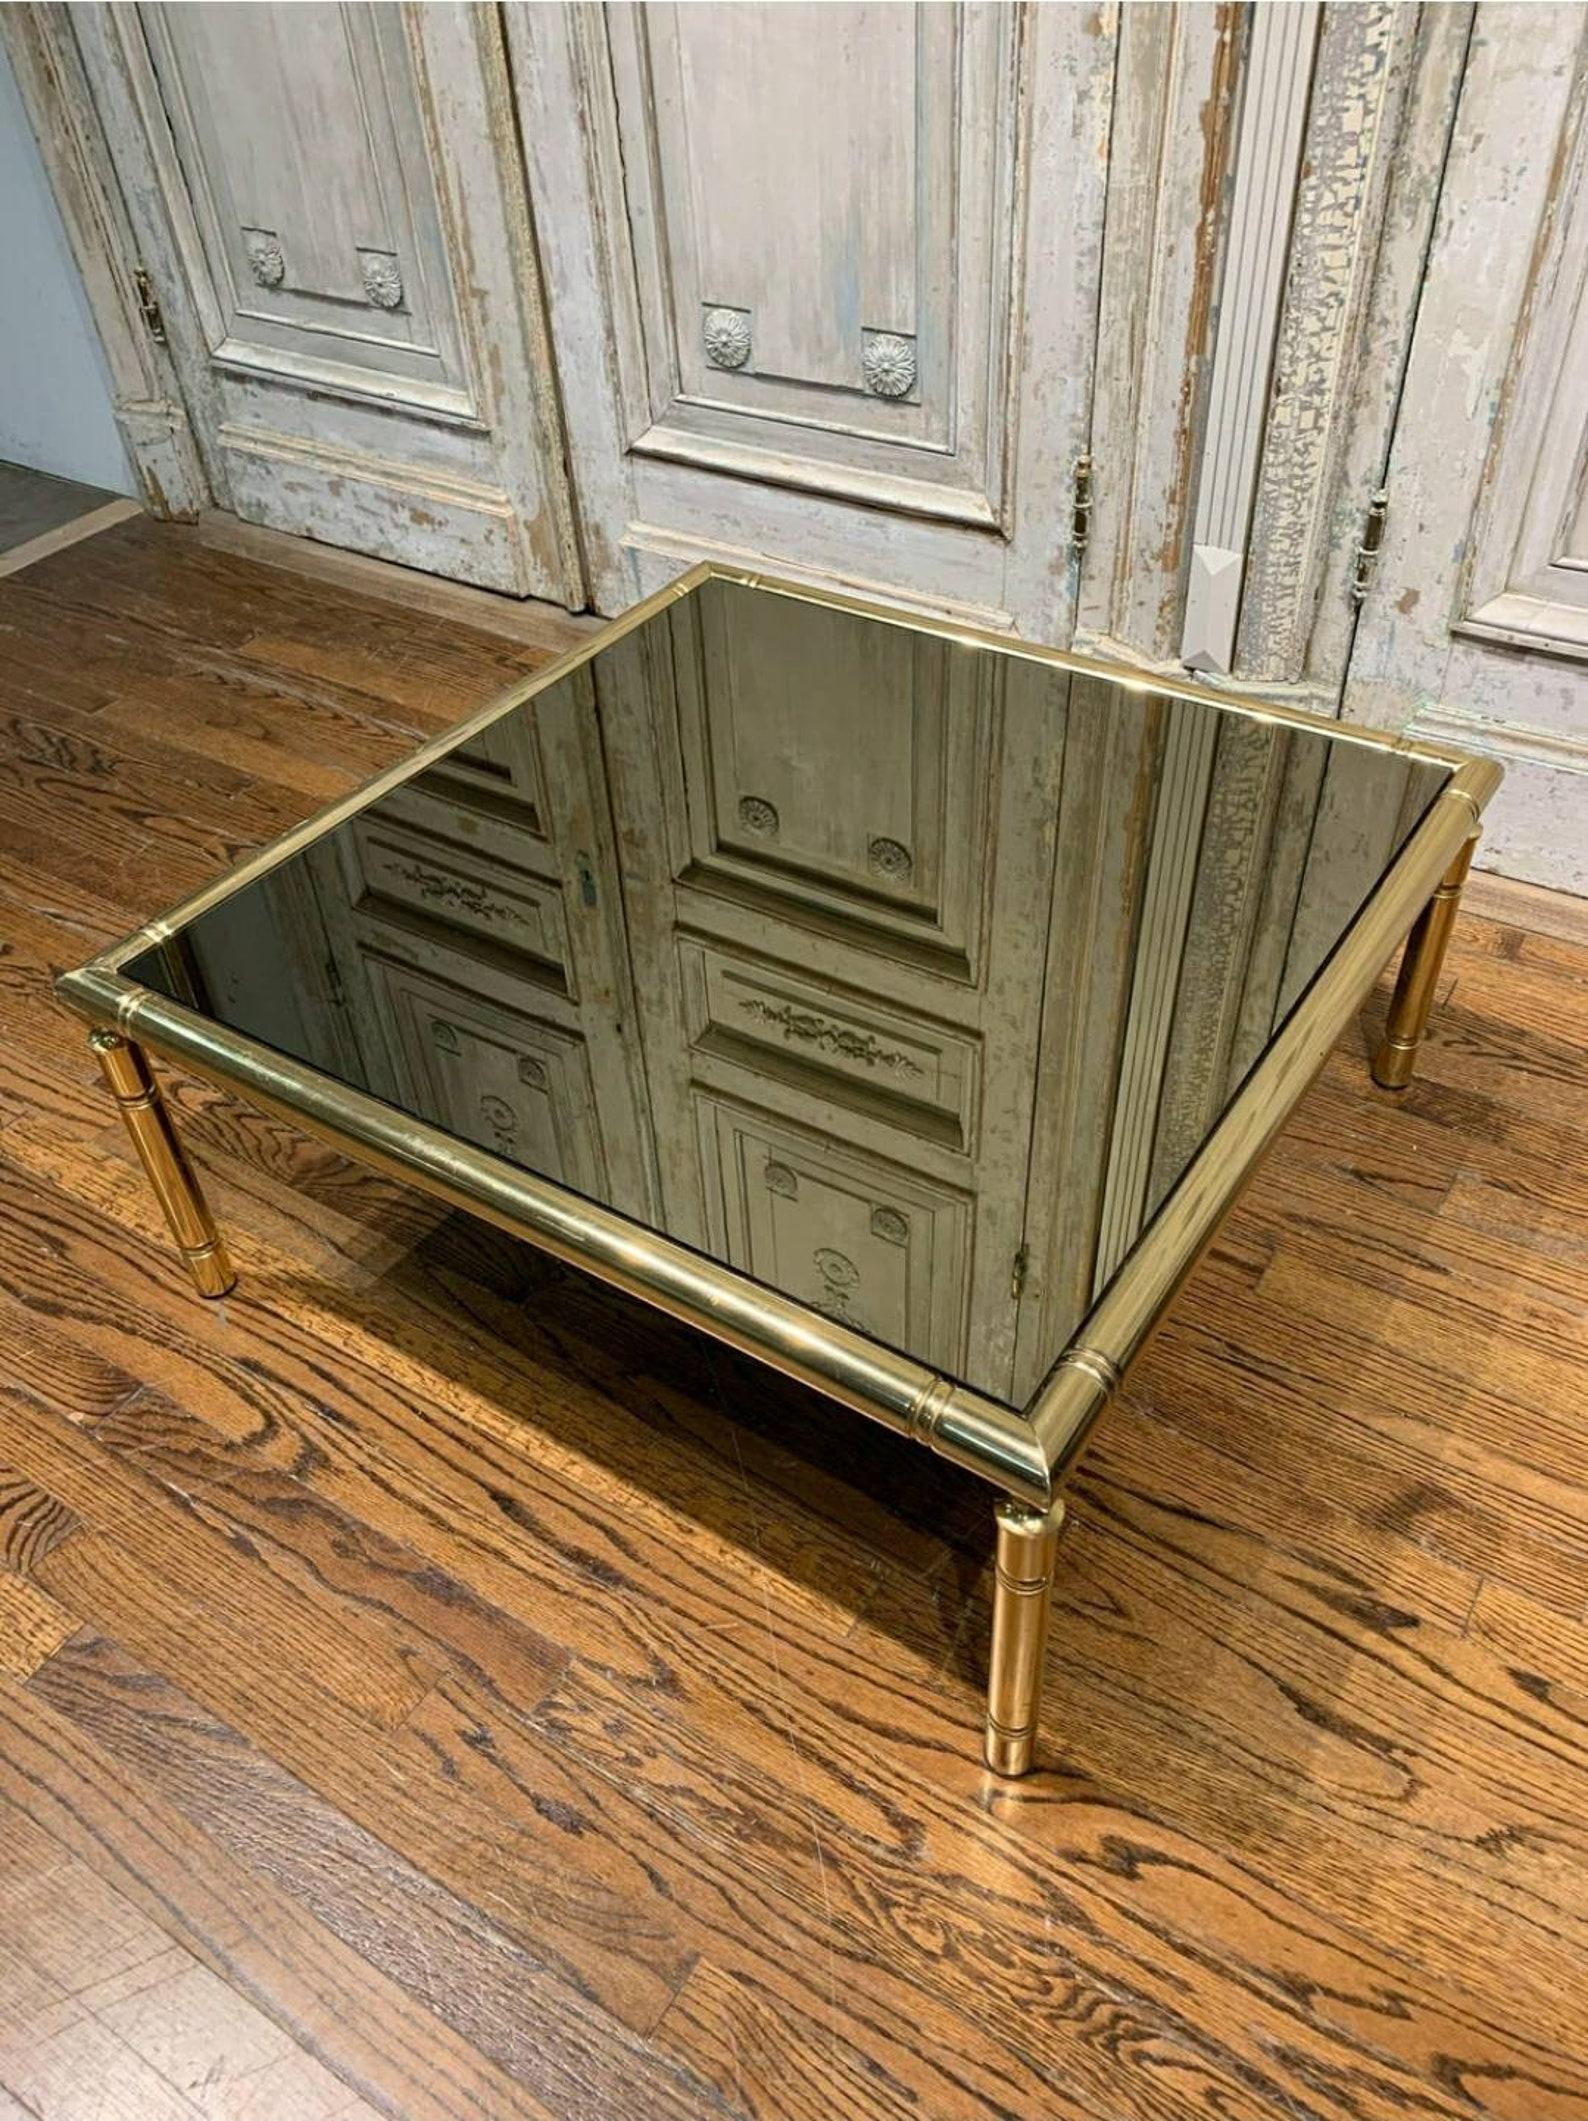 A large, square, French tubular polished brass table, circa 1960s/1970s. The vintage mid-century table has a base frame with a modern faux bamboo-like design, and inset smoked mirror glass top. Substantial proportions, well made, good quality and